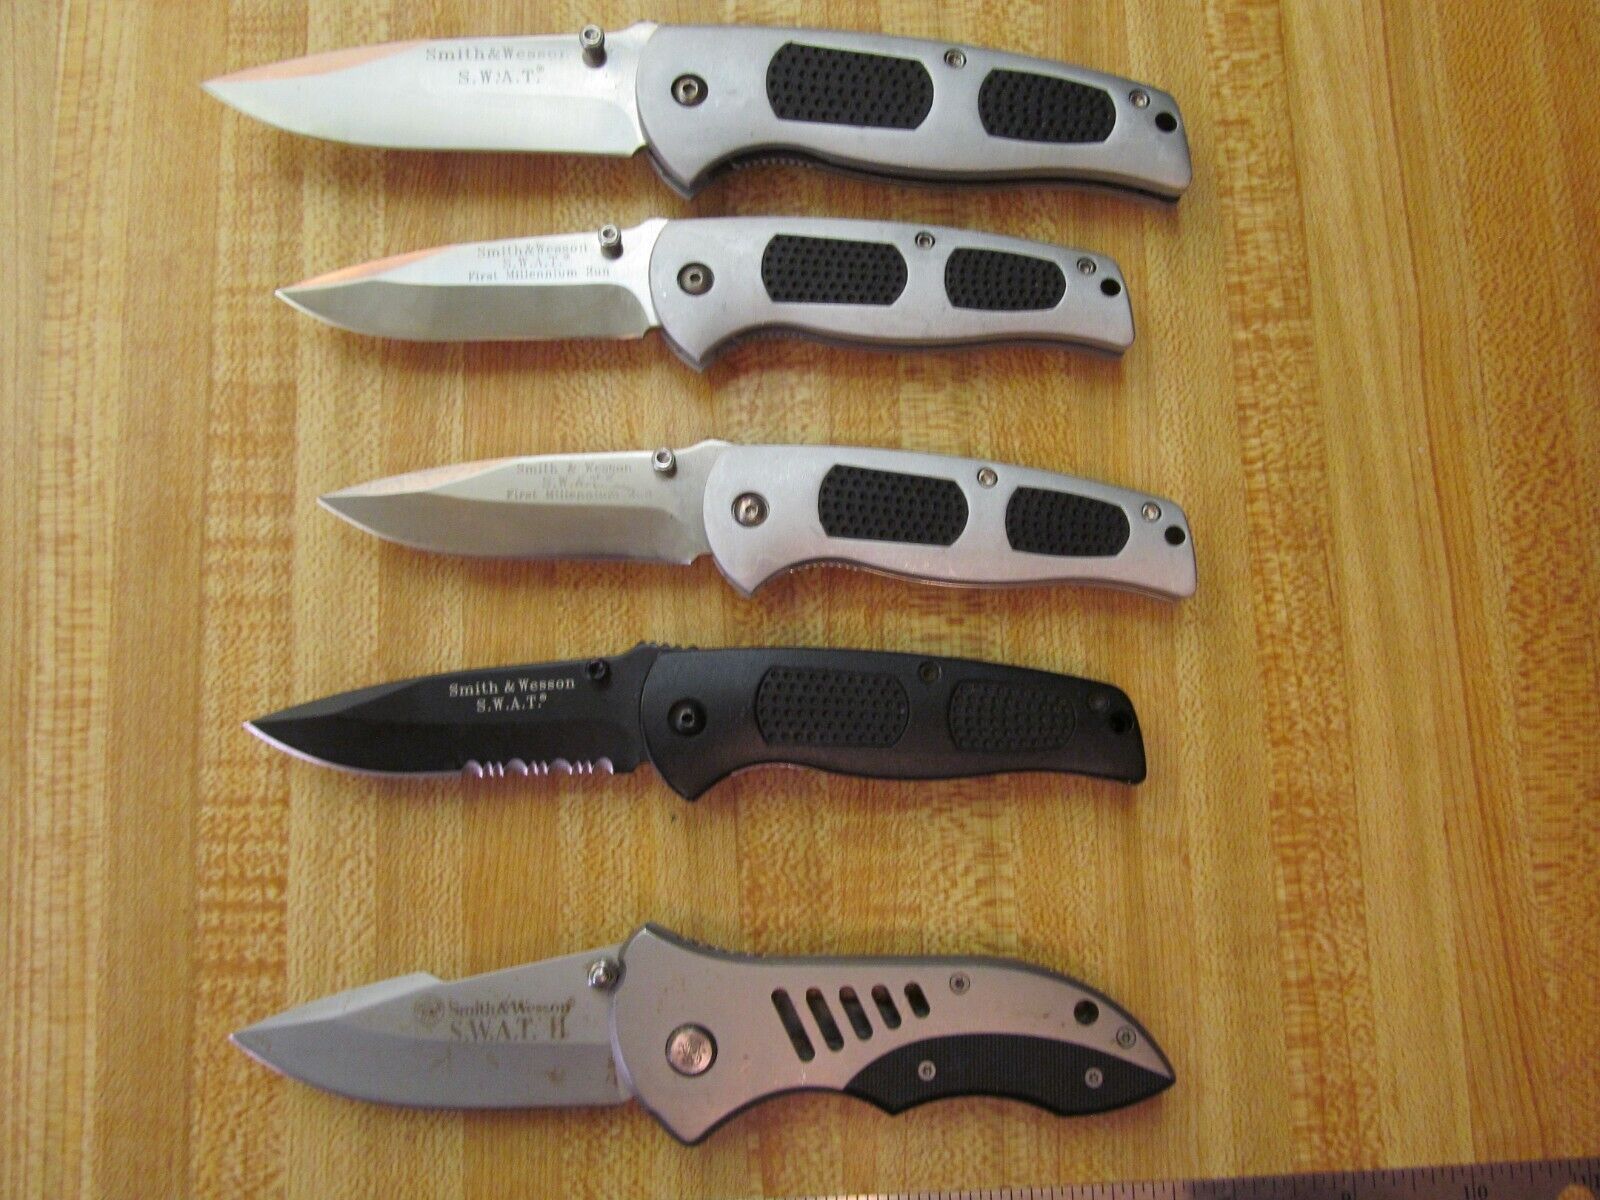 Lot Of 5 Smith And Wesson S.W.A.T. Knives